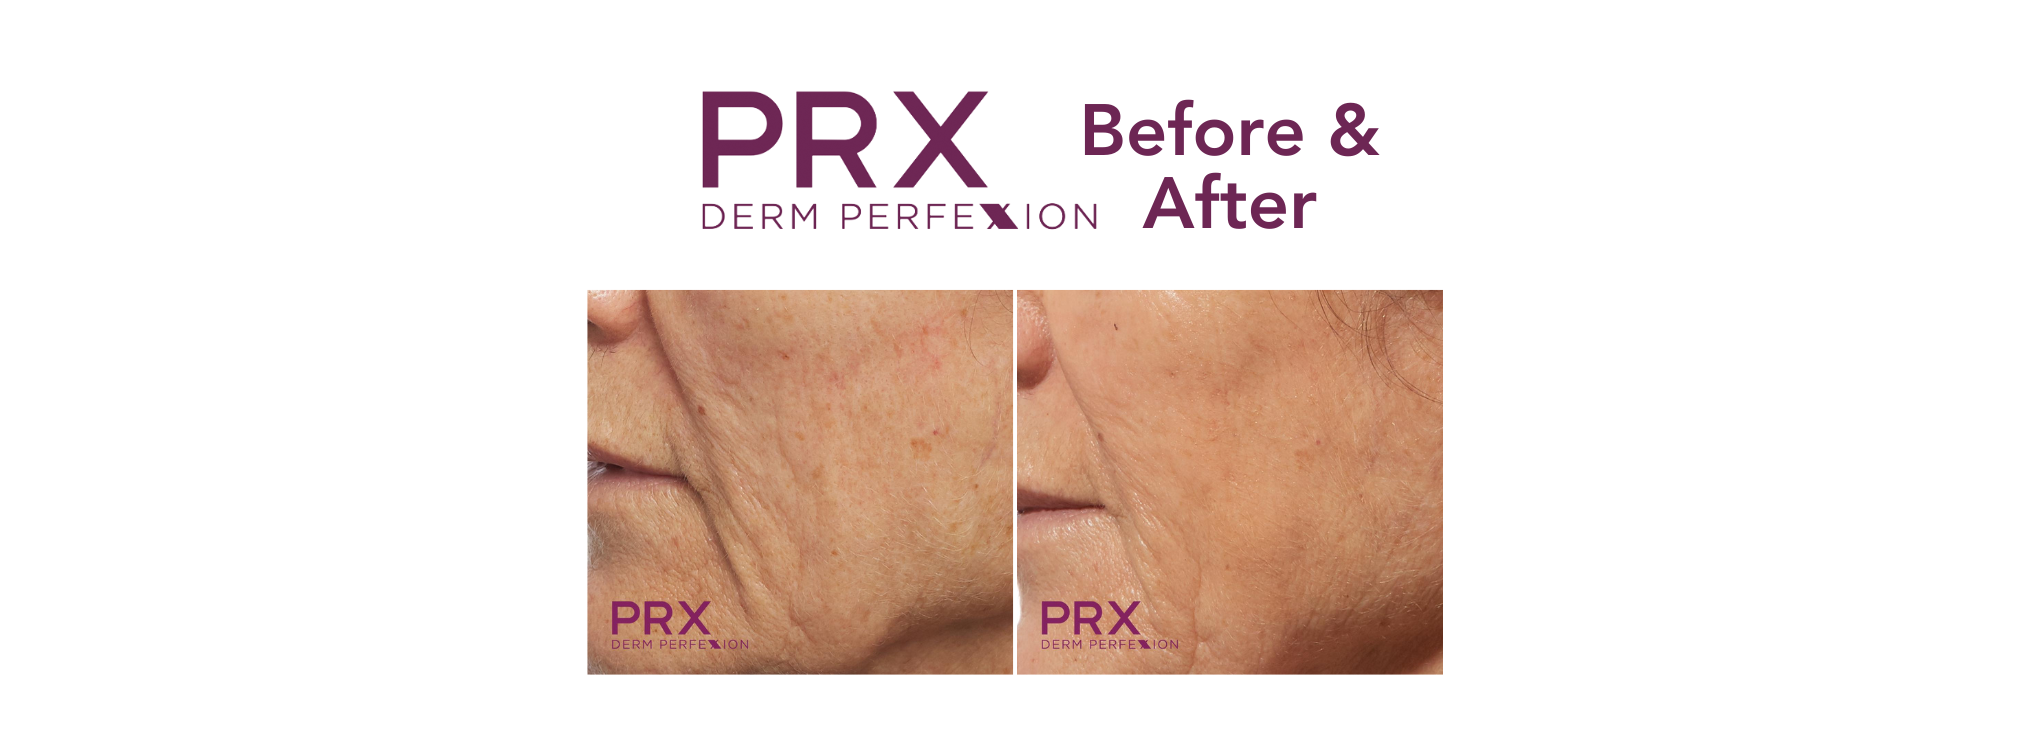 Discover the PRX Derm Perfexion Difference: PRX T33 Before and After